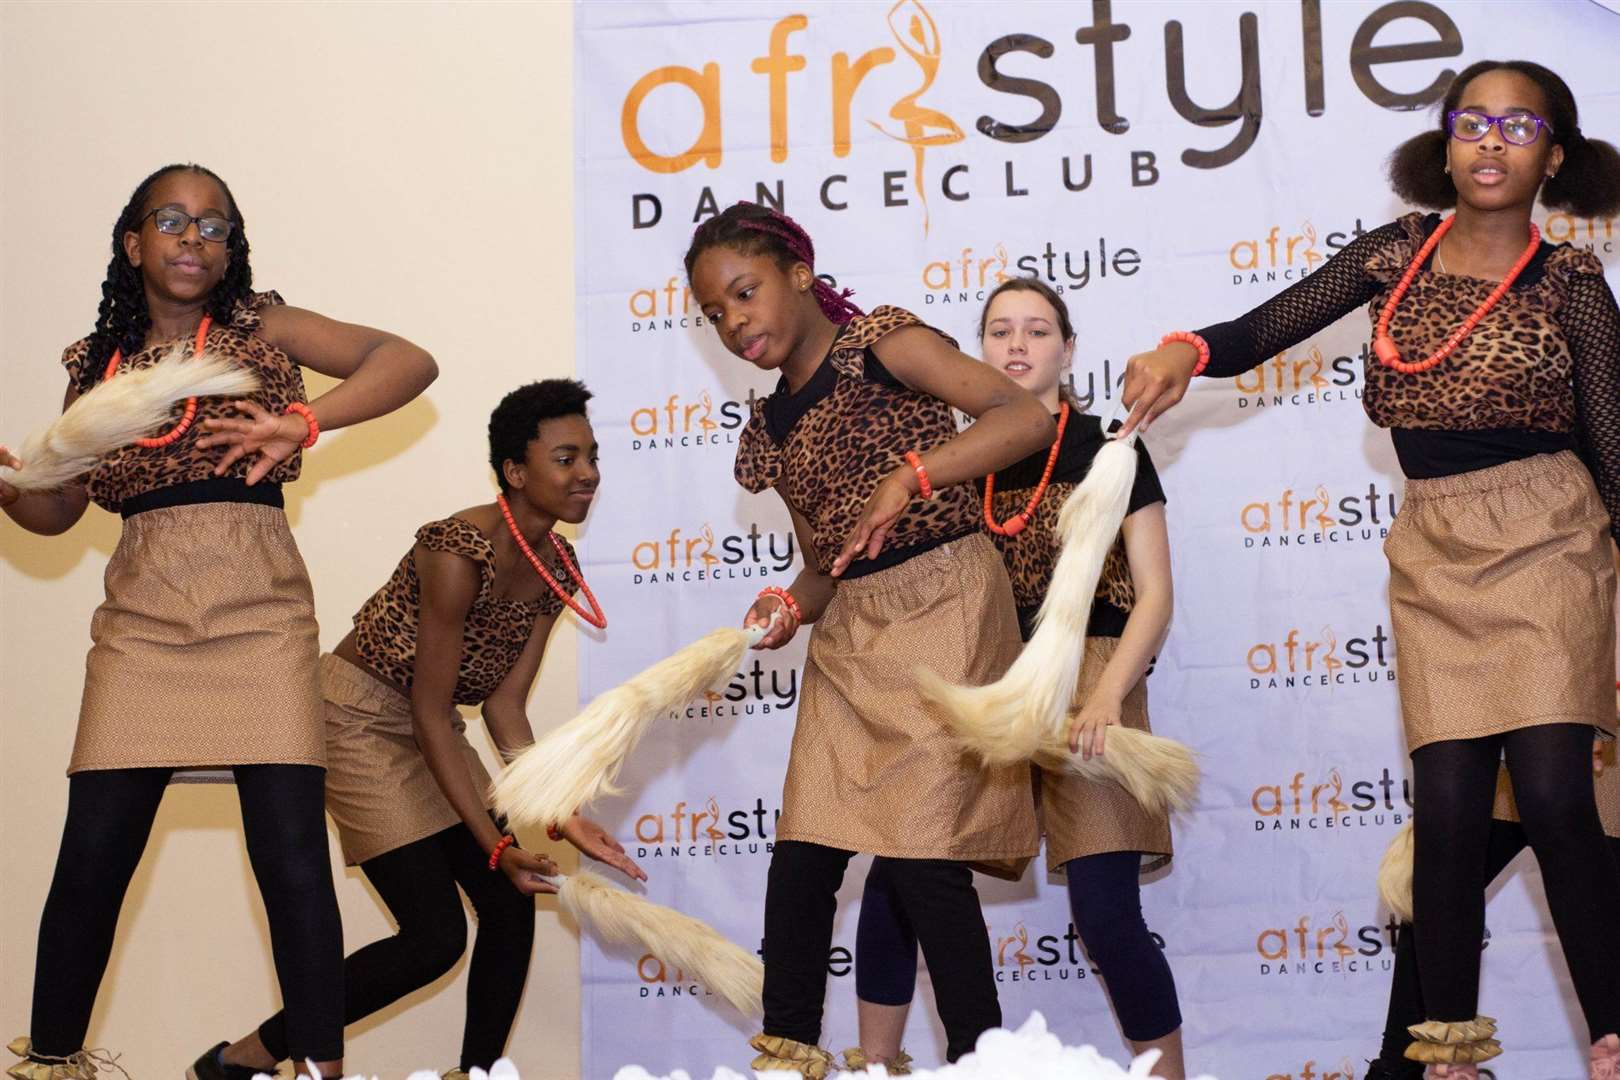 Afristyle Dance Club will be bringing their own special mix of dance, music and drama to Buckie. Picture: Afristyle Dance Club